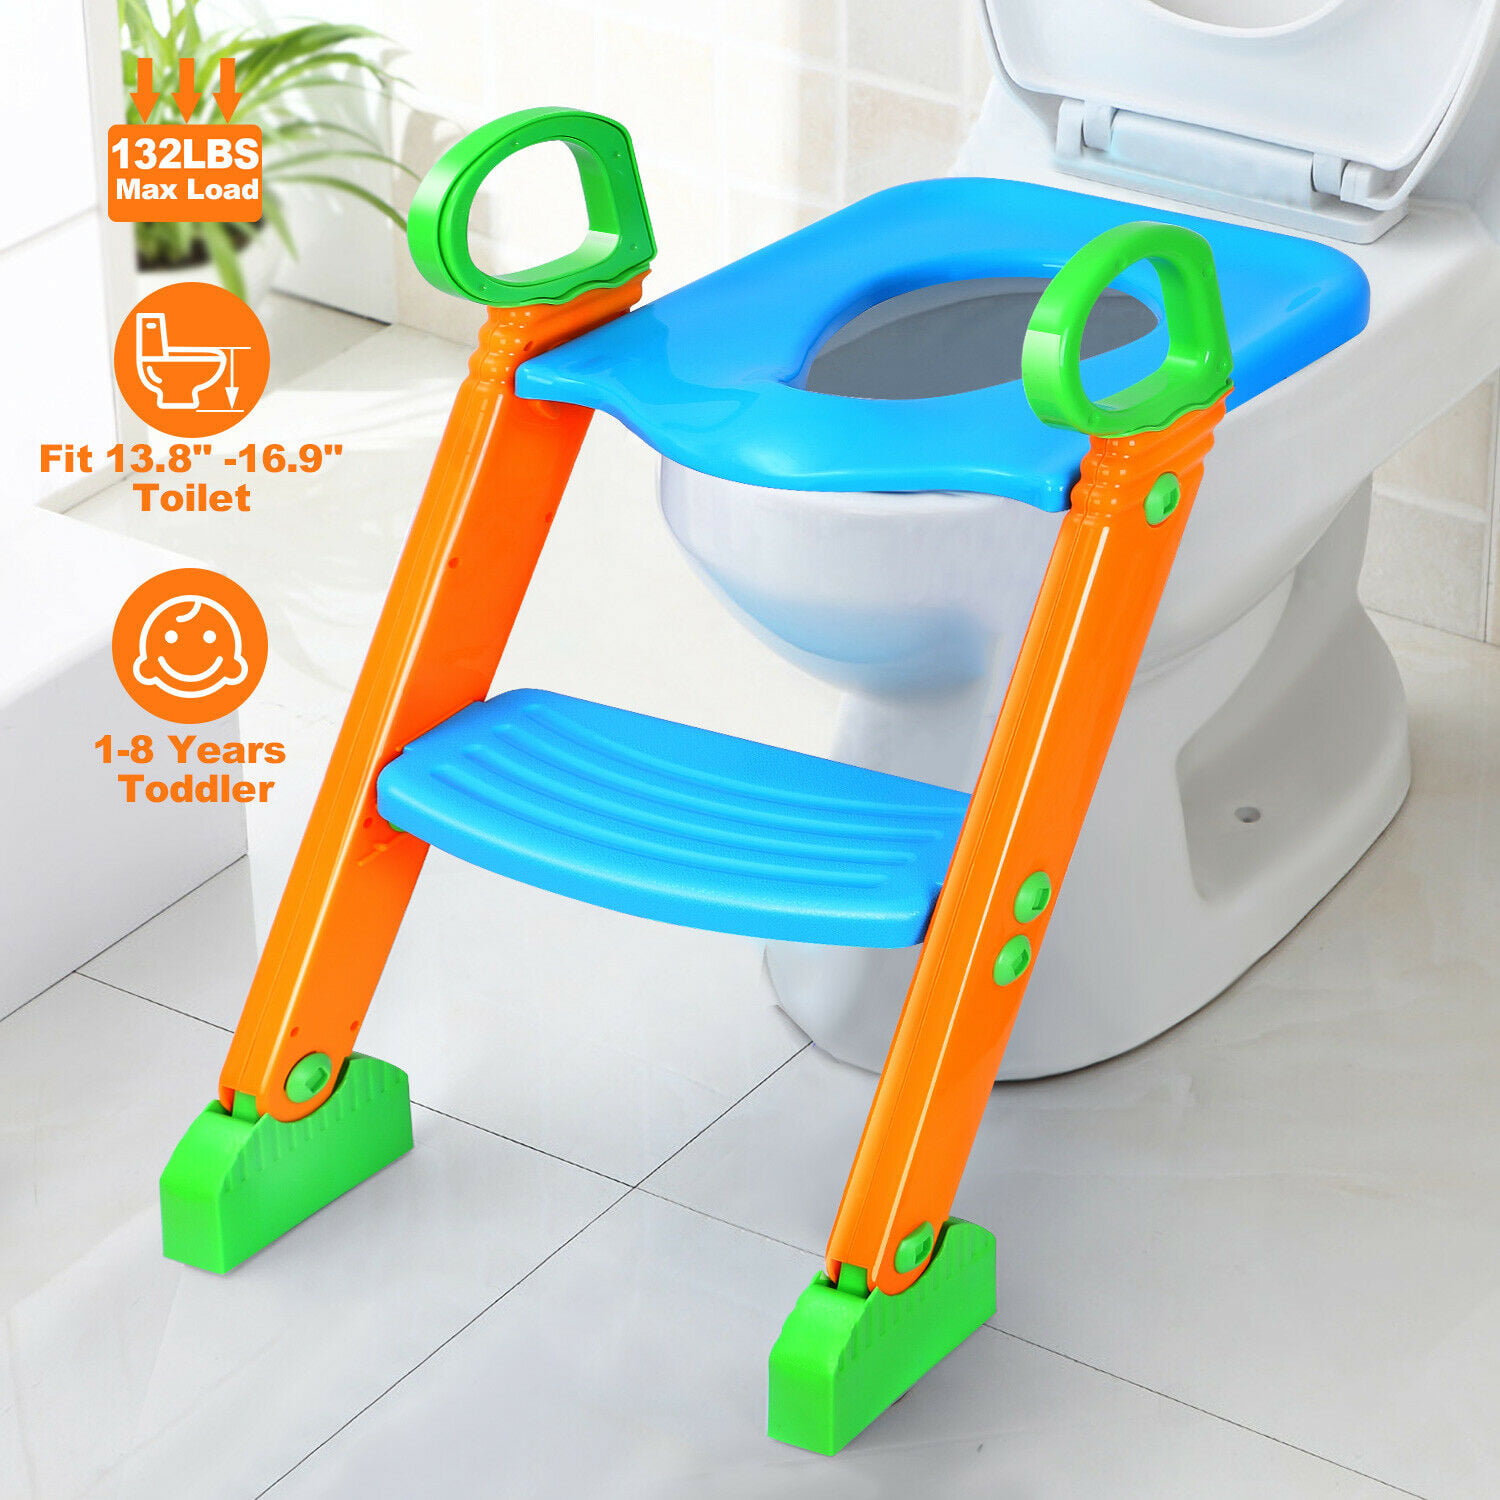 New Children’s Toddler Ladder Potty Training Step Up Kids Seat Fits Most Toilet 